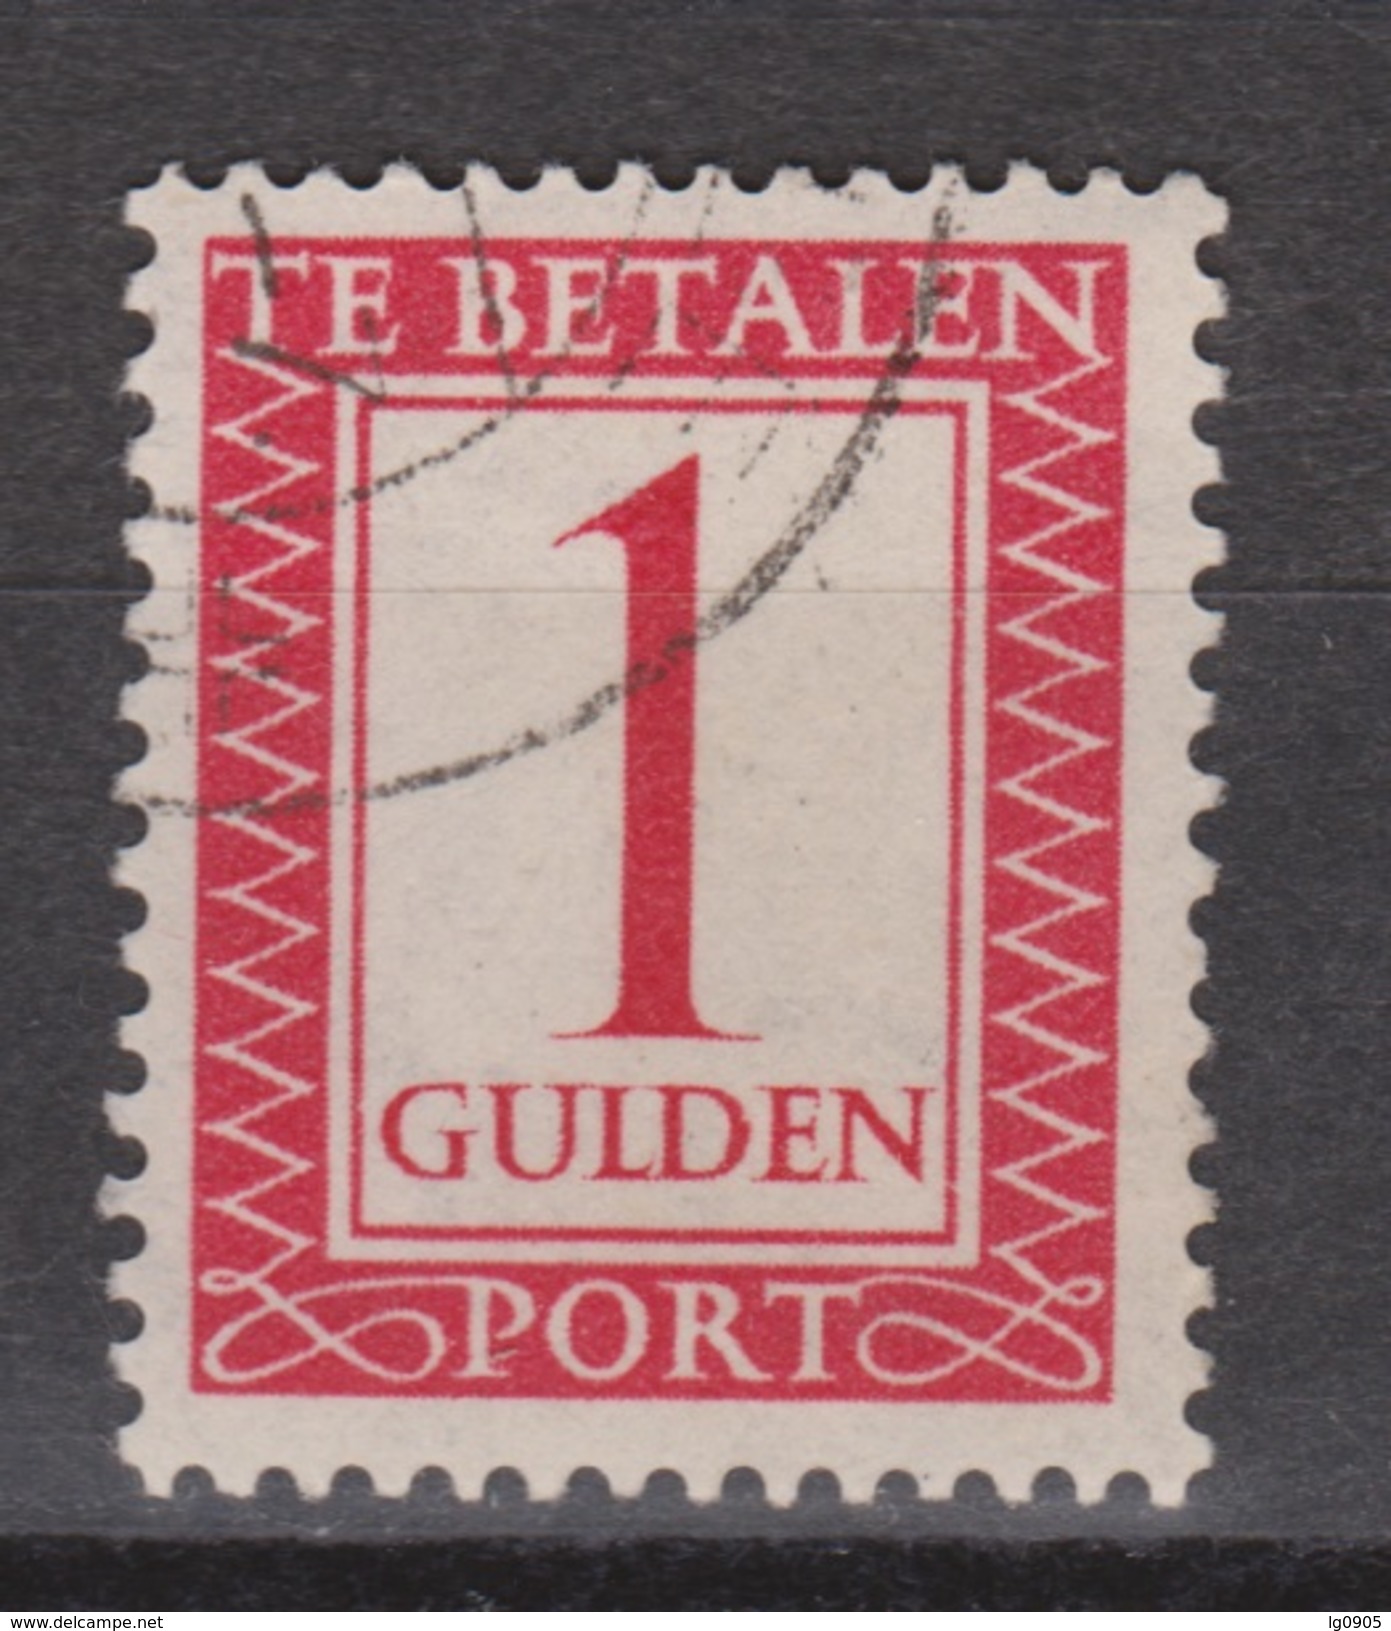 NVPH Nederland Netherlands Holanda Pays Bas Port 105 Used Timbre-taxe, Postmarke, Sellos De Correos NOW MANY DUE STAMPS - Impuestos